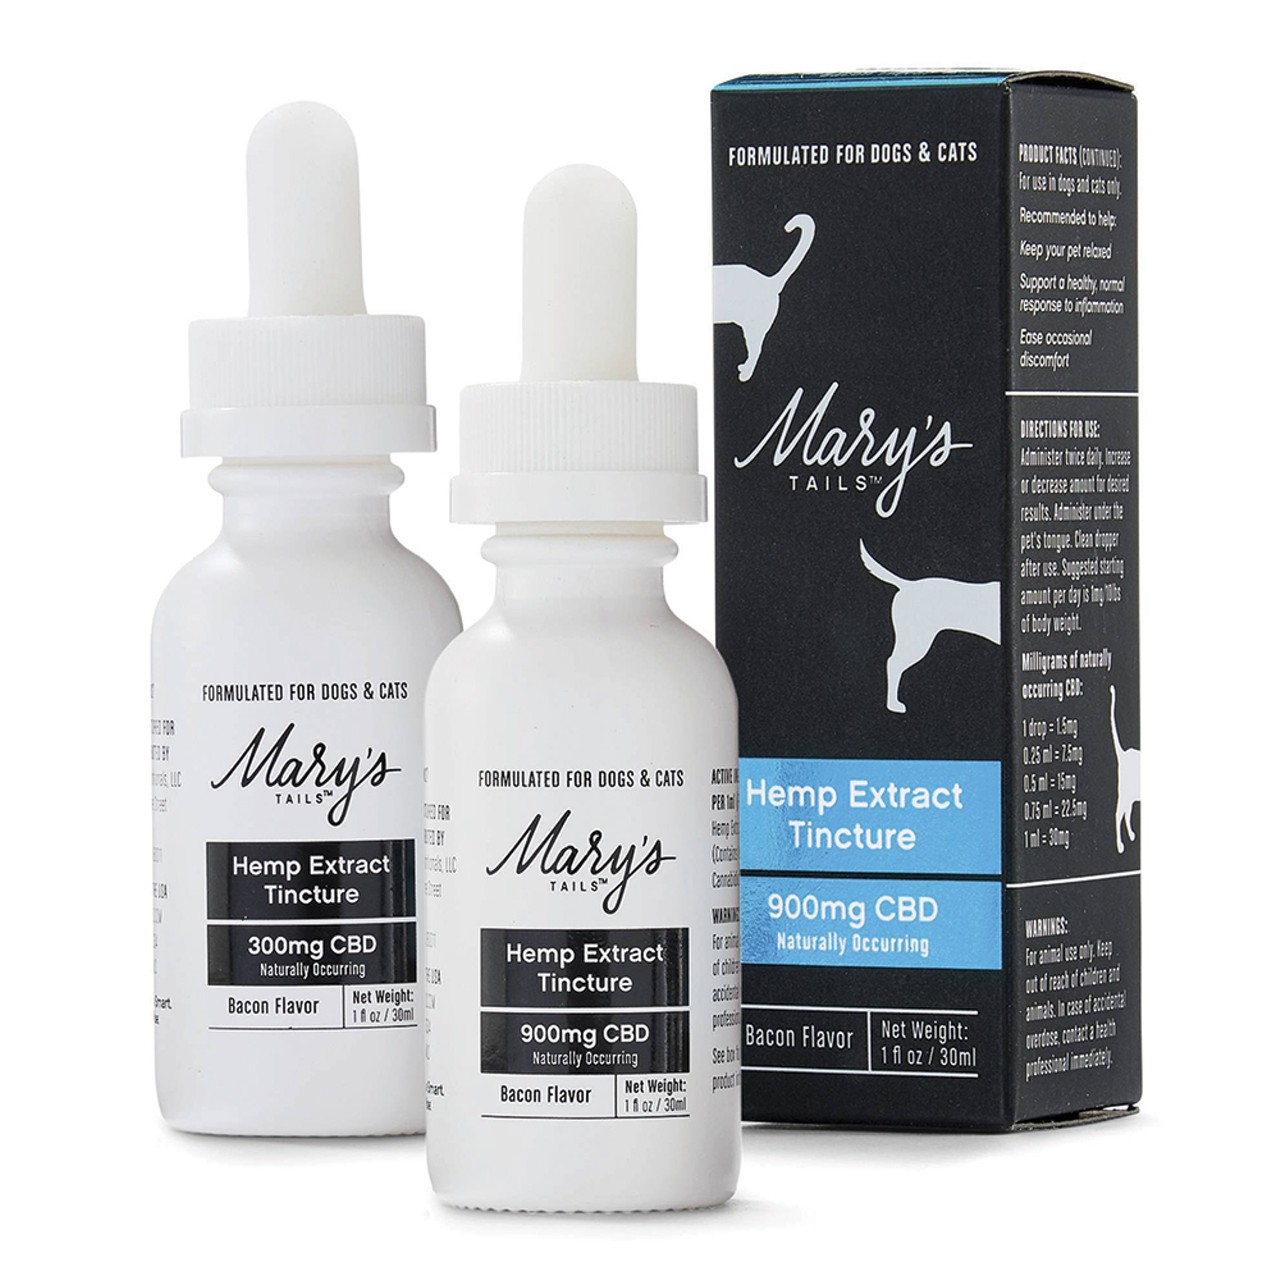 For those with four-legged friends
Mary&#146;s Tails Hemp Extract Pet Tincture, Extra Strength, 900mg CBD, $95
LIV, 2625 Hilton Rd., Ste. 100, Ferndale; 248-420-4200; livferndale.com
Fact: Animals are better than humans. Also fact: They deserve the same pain and anxiety relief as we shitty-ass humans do. There are a variety of CBD pet products on the market, but reviews point to Mary&#146;s Tails Extra Strength Extract Tincture being top dog &#151;&nbsp;or cat. The extra-strength version of the pet tincture offers 300mg of naturally occurring CBD, perfect for alleviating joint pain in your aging golden lab or calming an anxious kitty. Oh, and it comes in a tasty bacon flavor to make daily dosing a breeze.